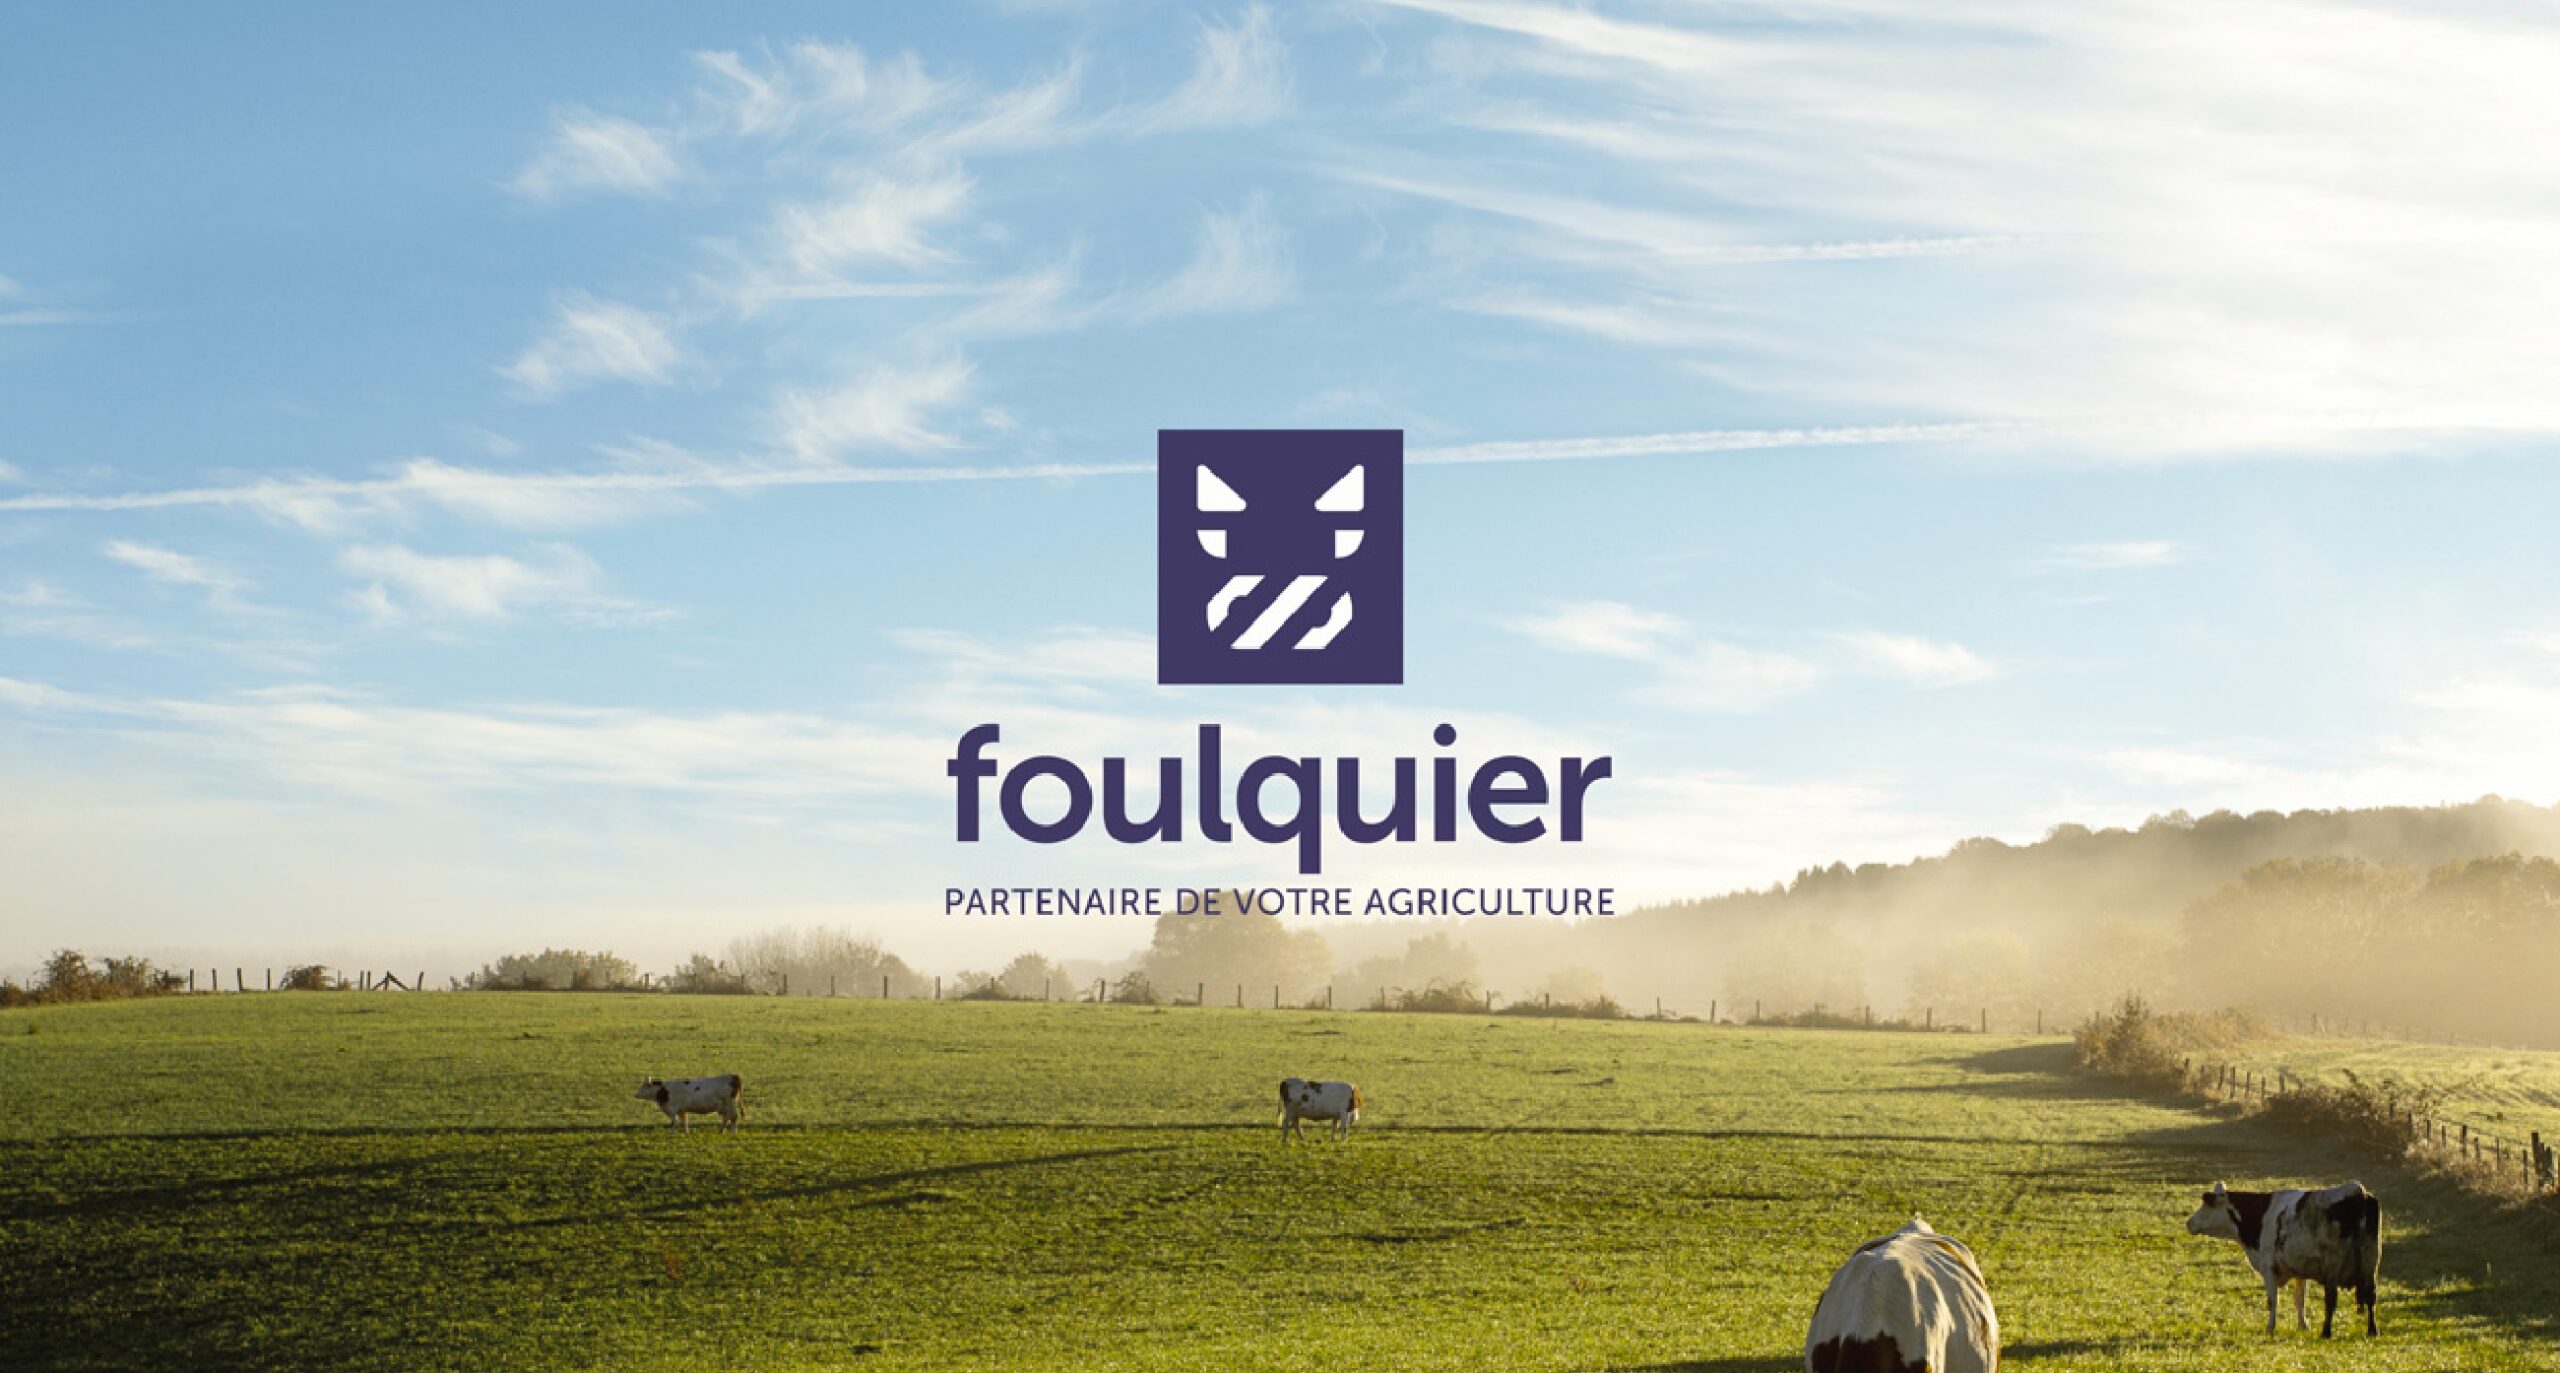 image for Ets Foulquier